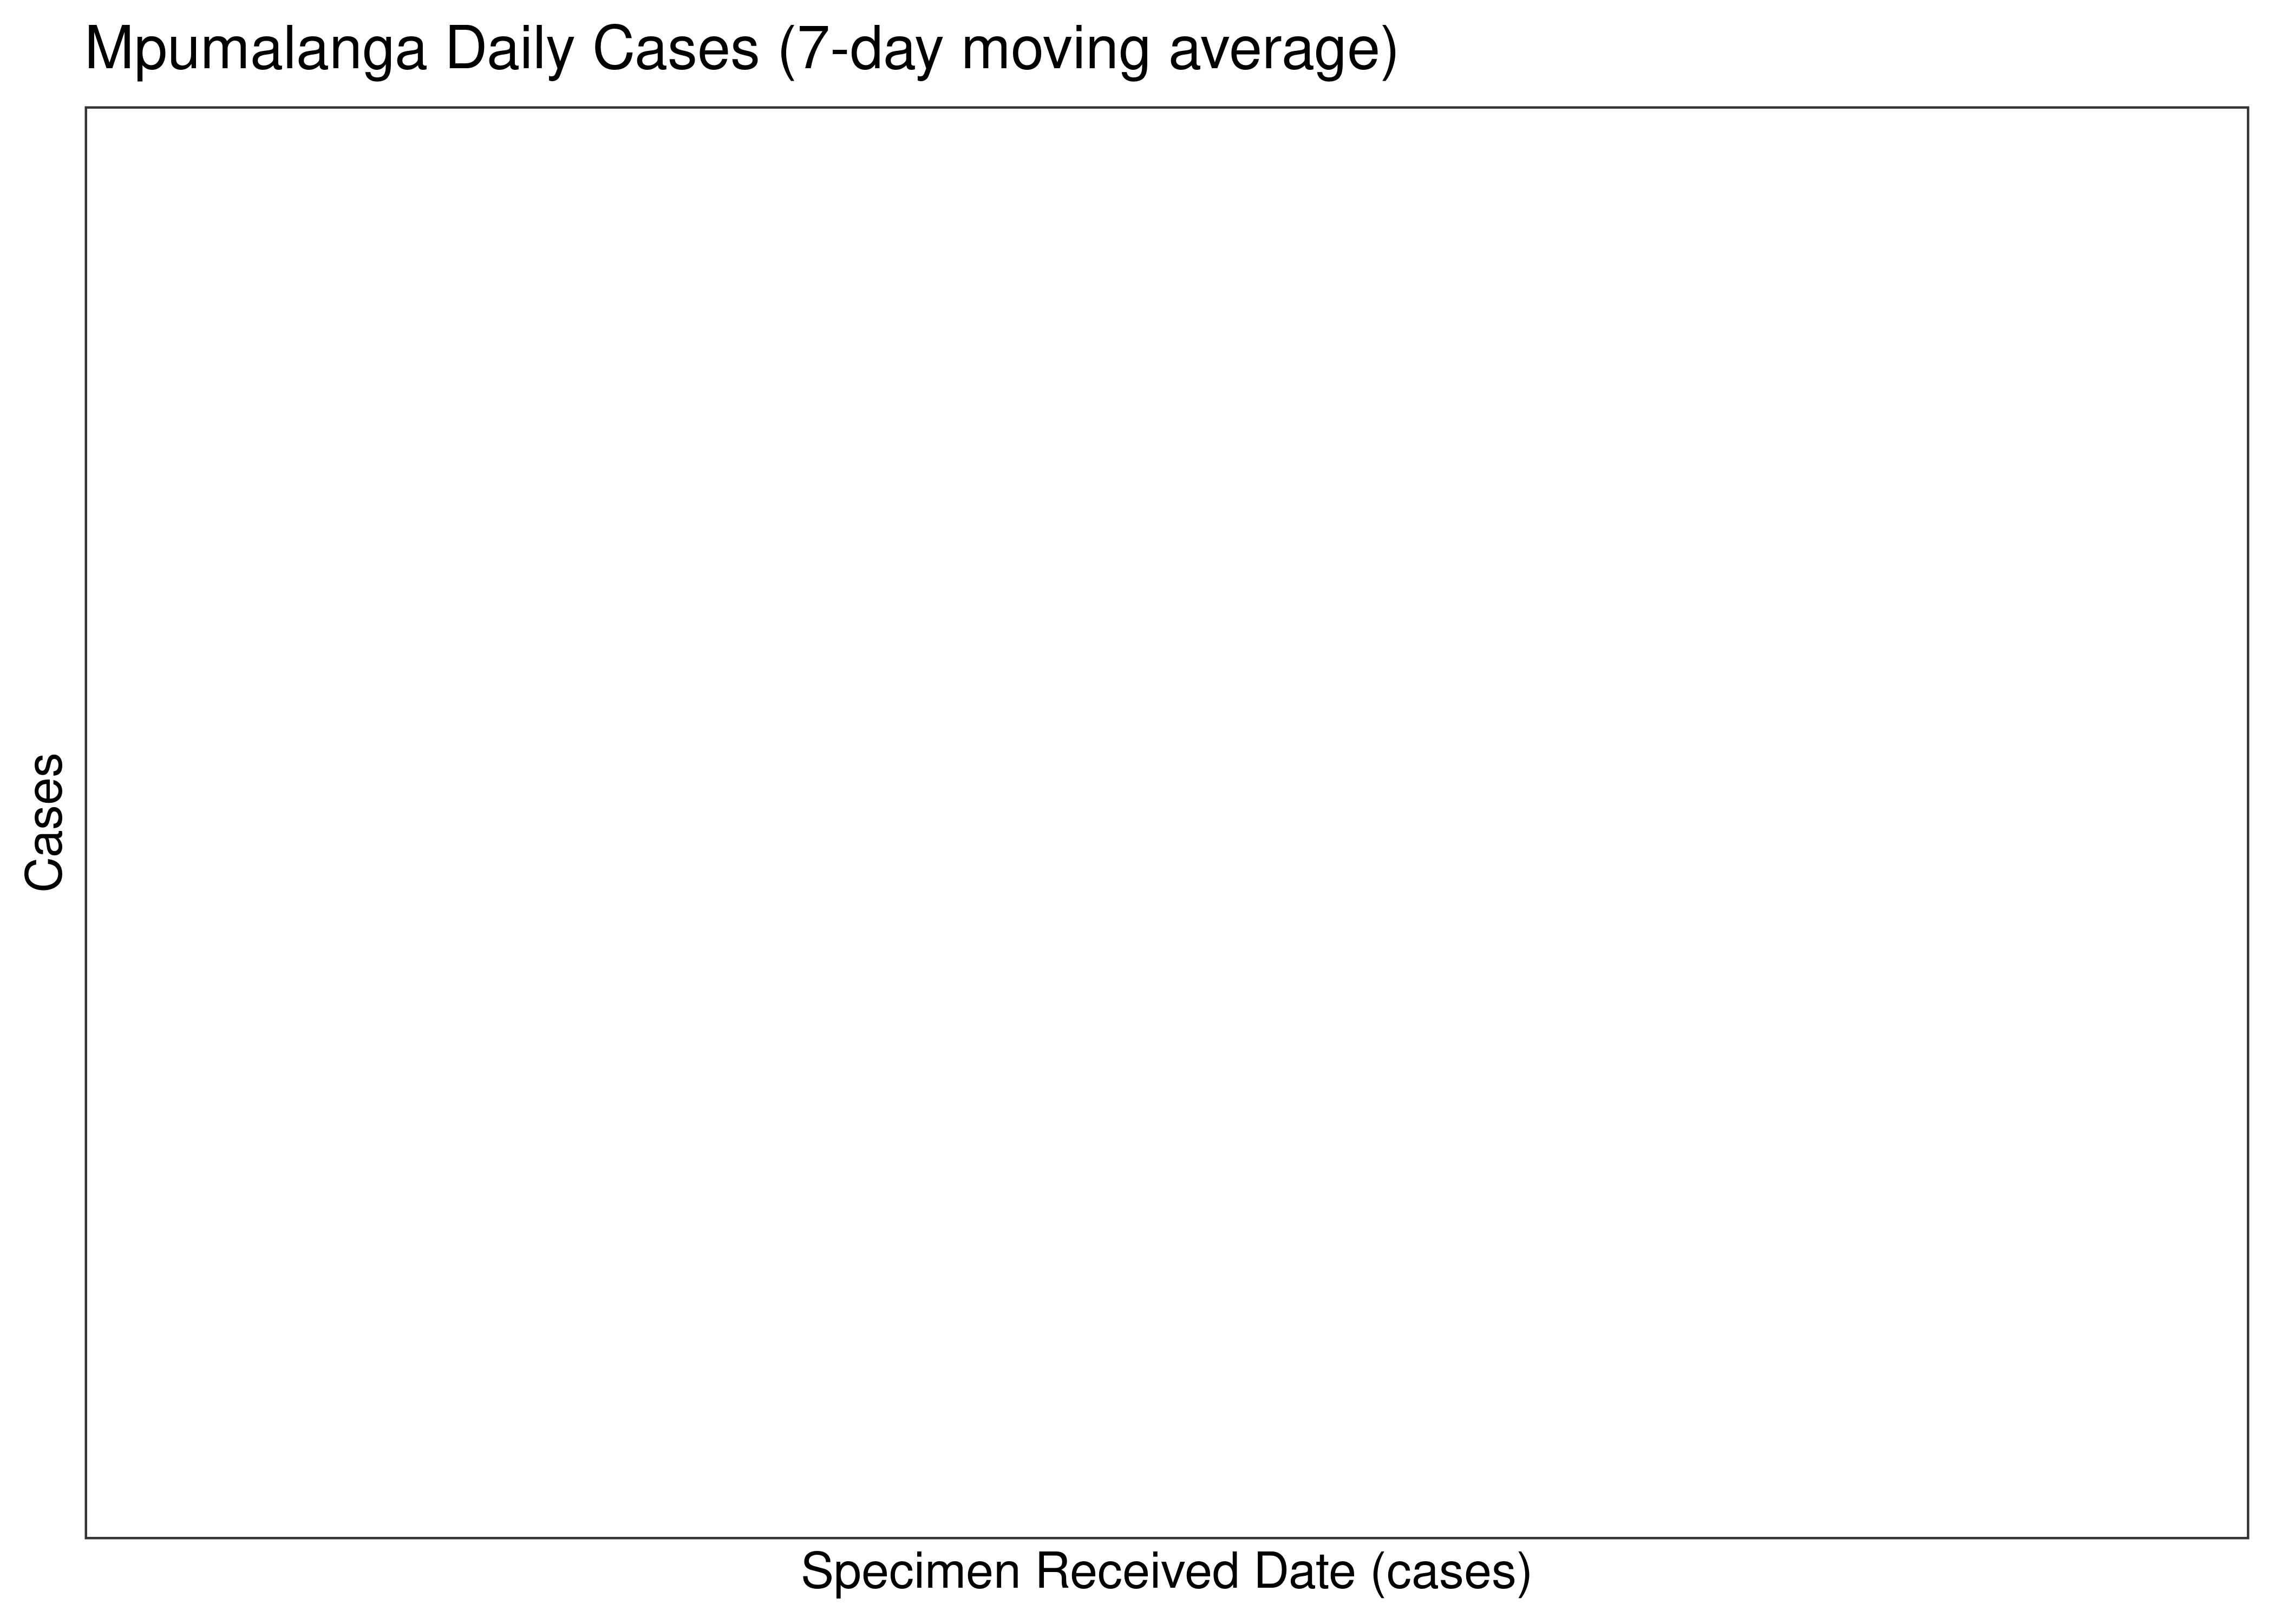 Mpumalanga Daily Cases for Last 30-days (7-day moving average)